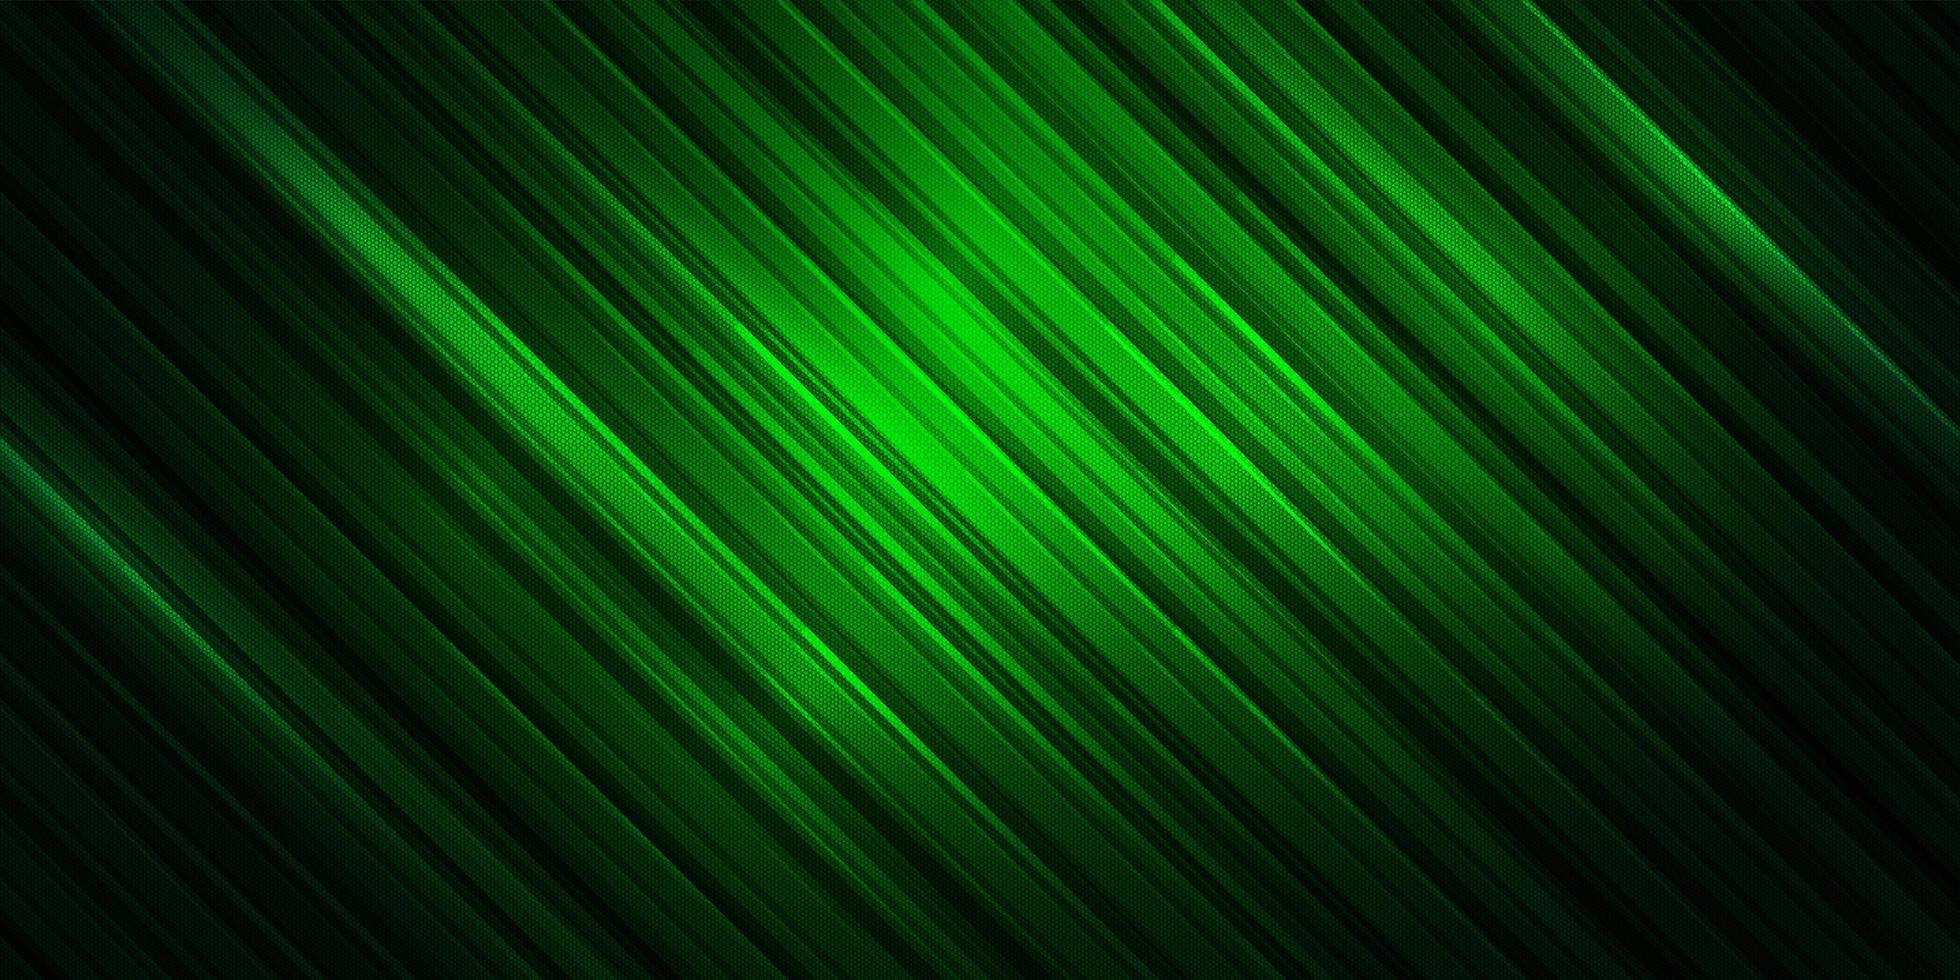 Green sripe pattern abstract sport style background vector